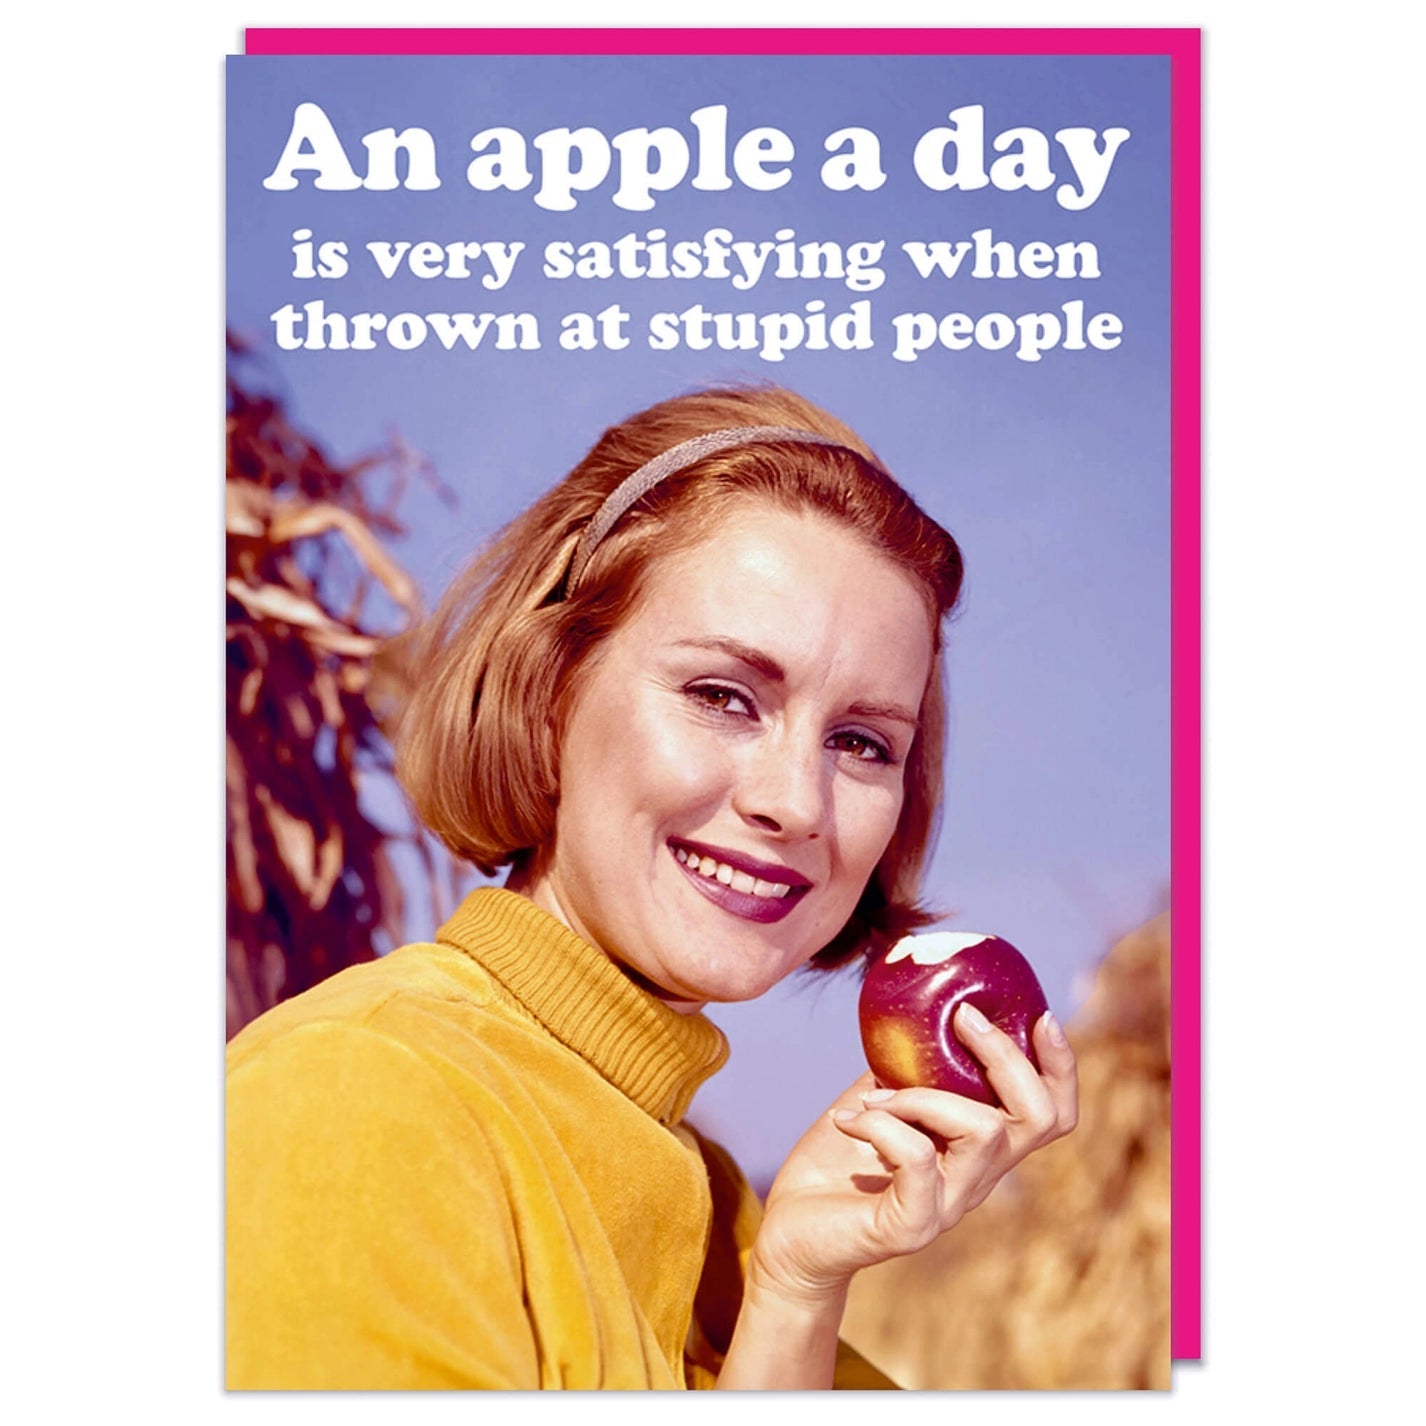 An Apple A Day Is Very Satisfying When Thrown at Stupid People Greeting Card